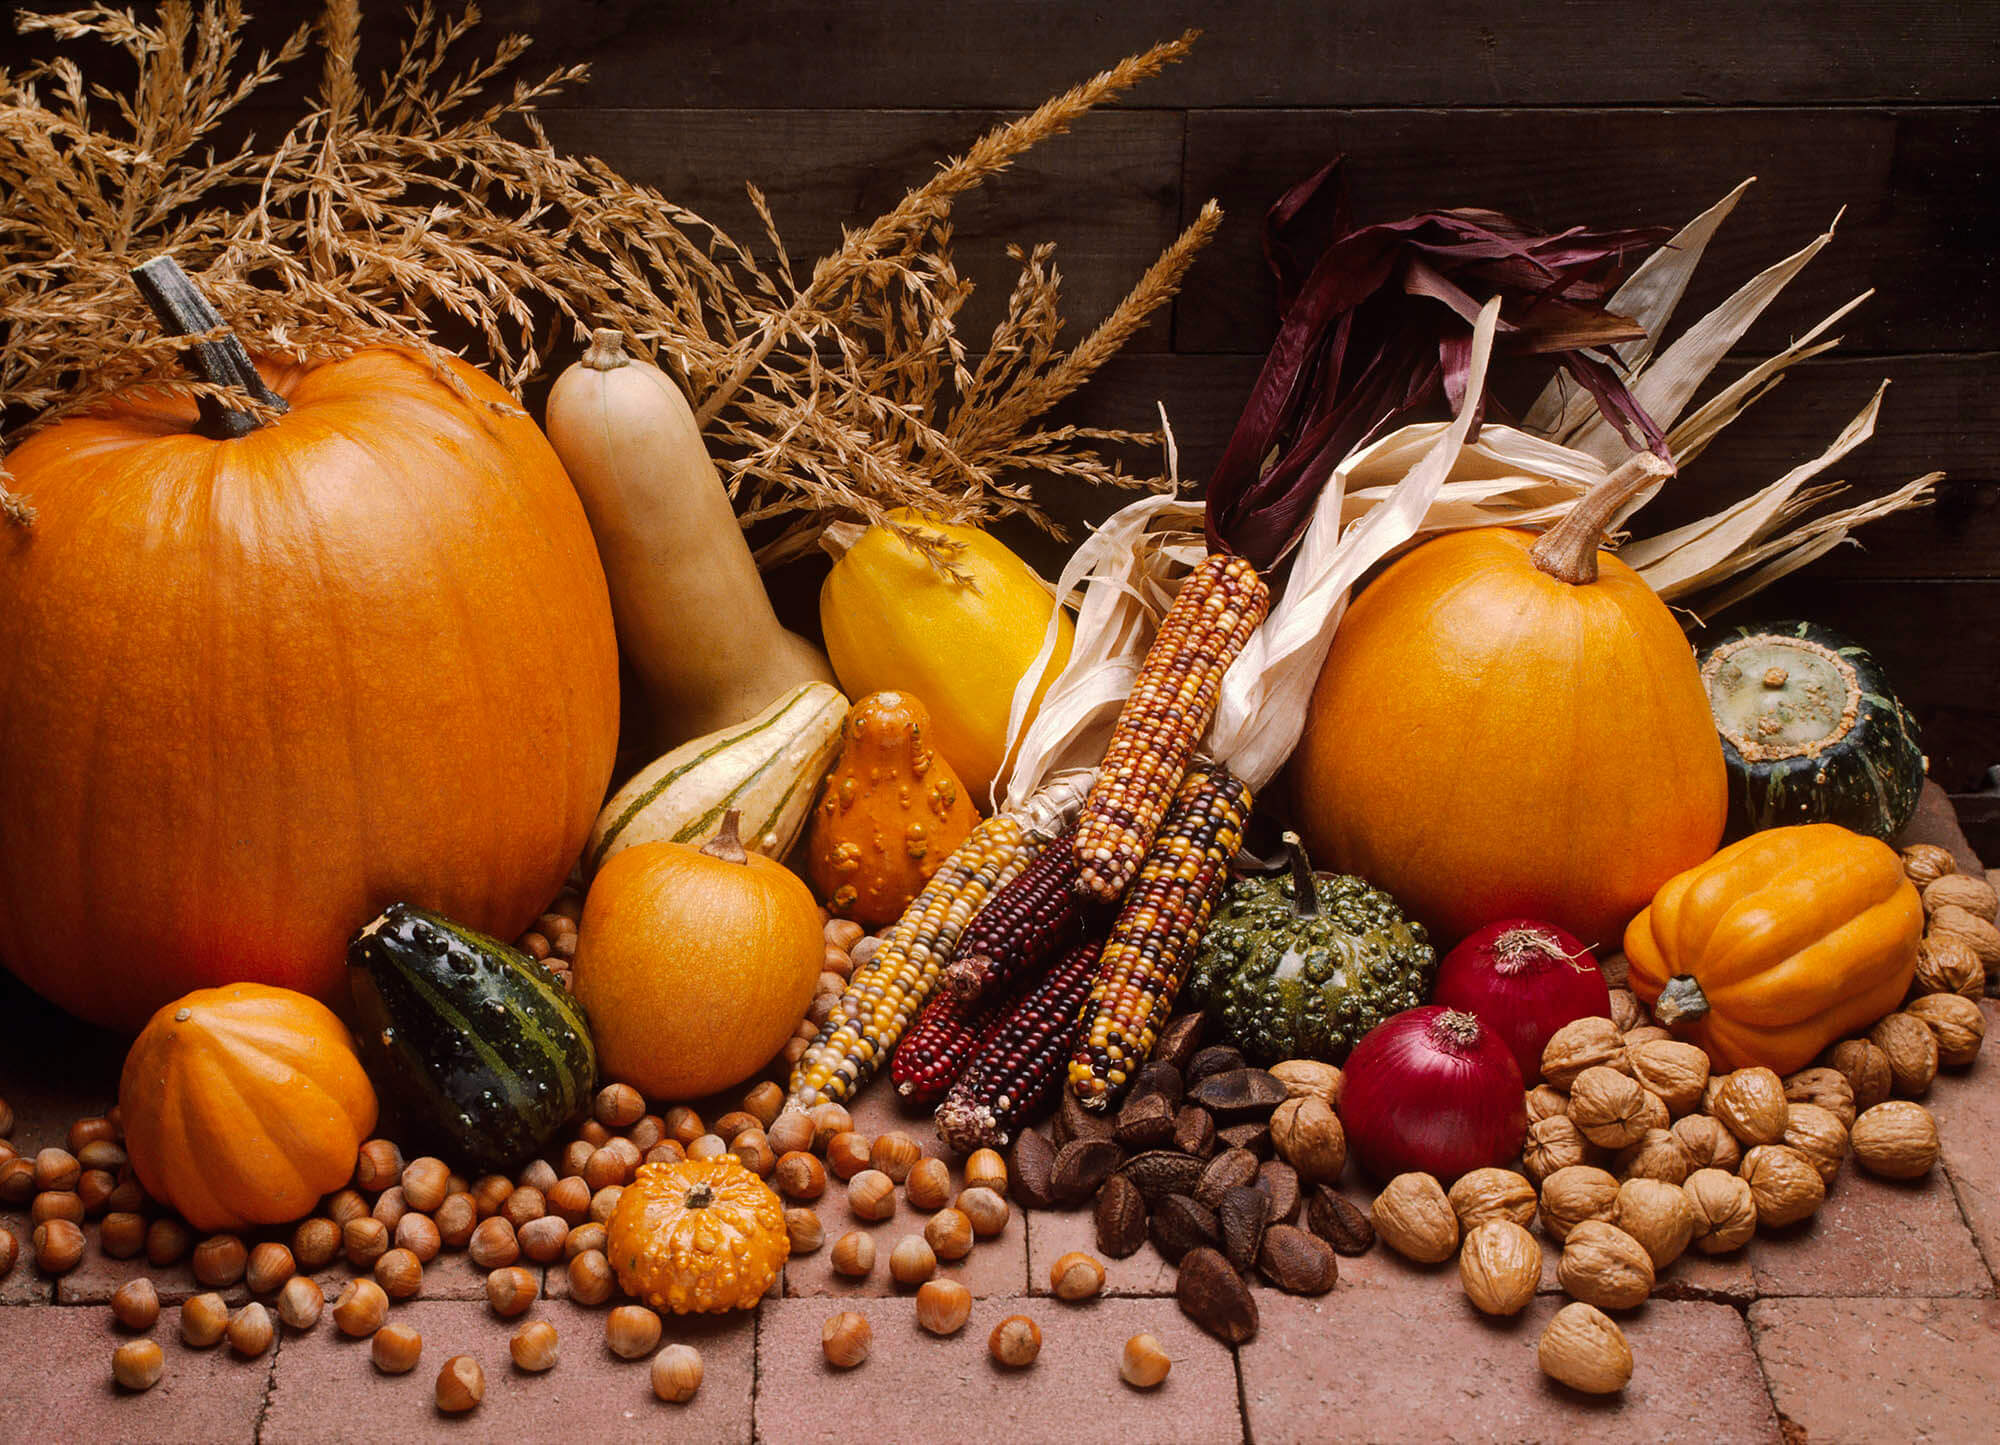 A display of autumn's harvest with gourds, pumpkins, Indian corn, red onions, walnuts and Brazil nuts. Food photography at the Eagle Visions studio.